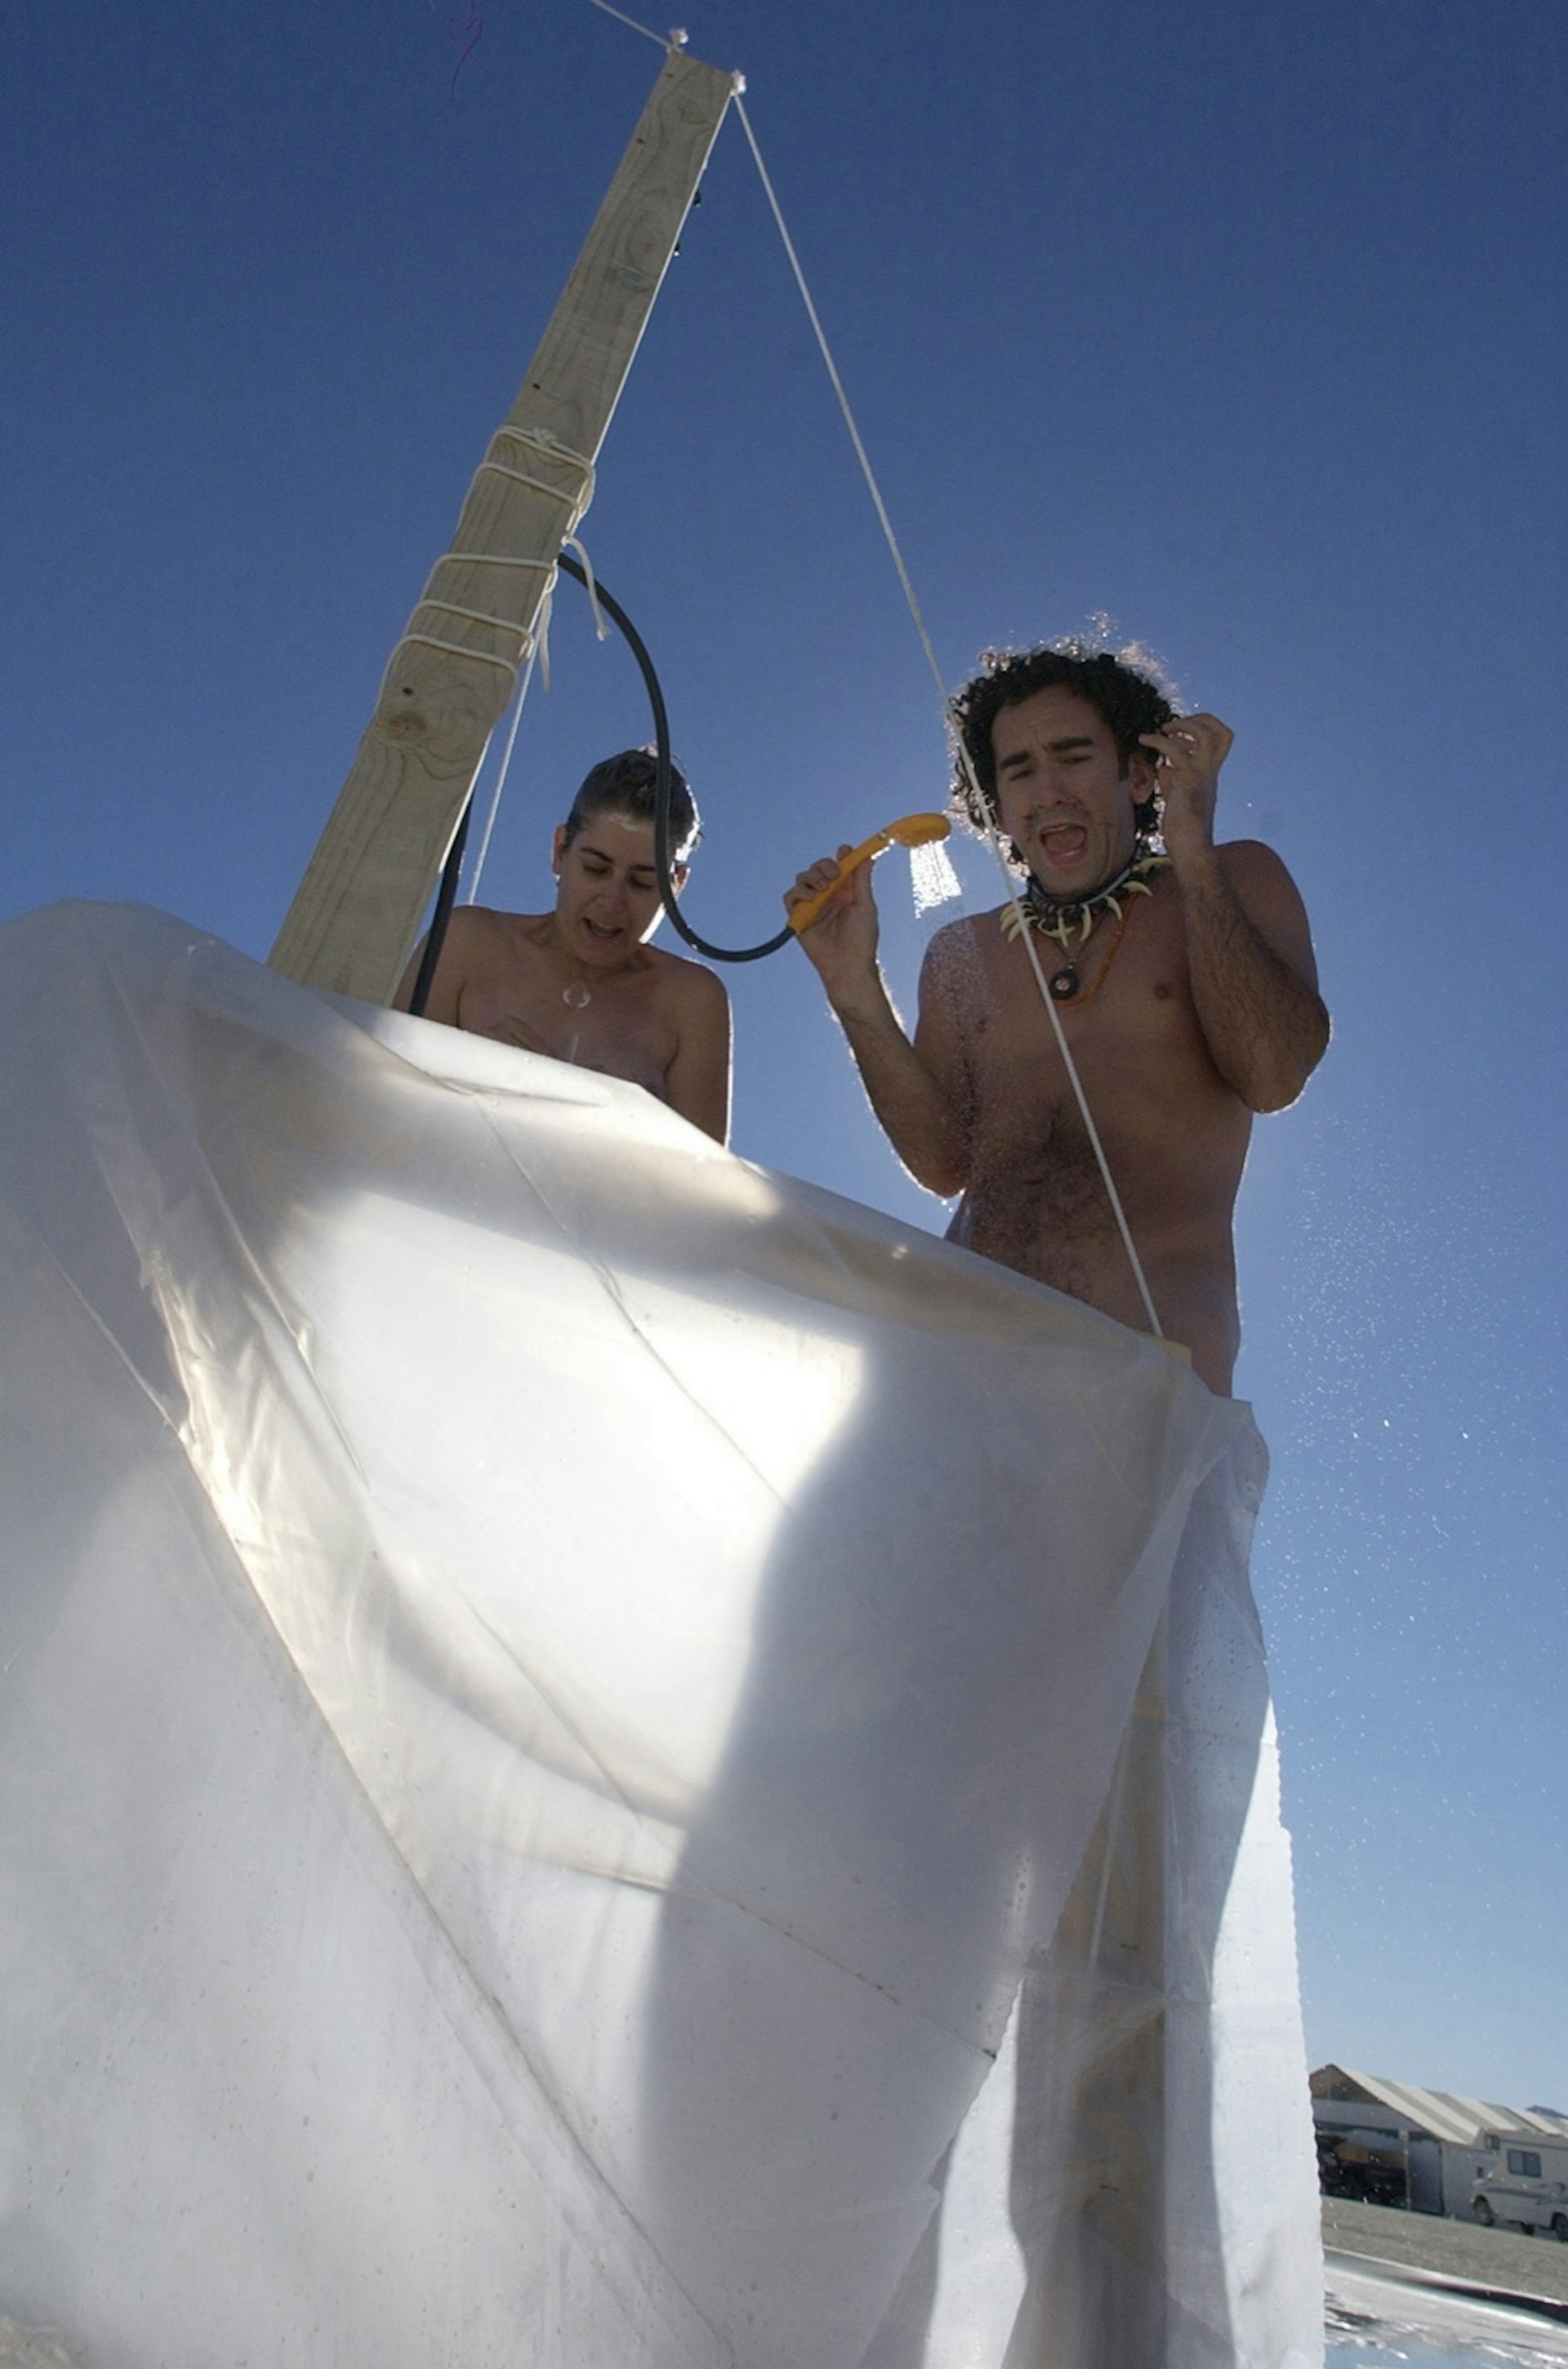 Two people take a shower behind a white sheet, they appear to be cold